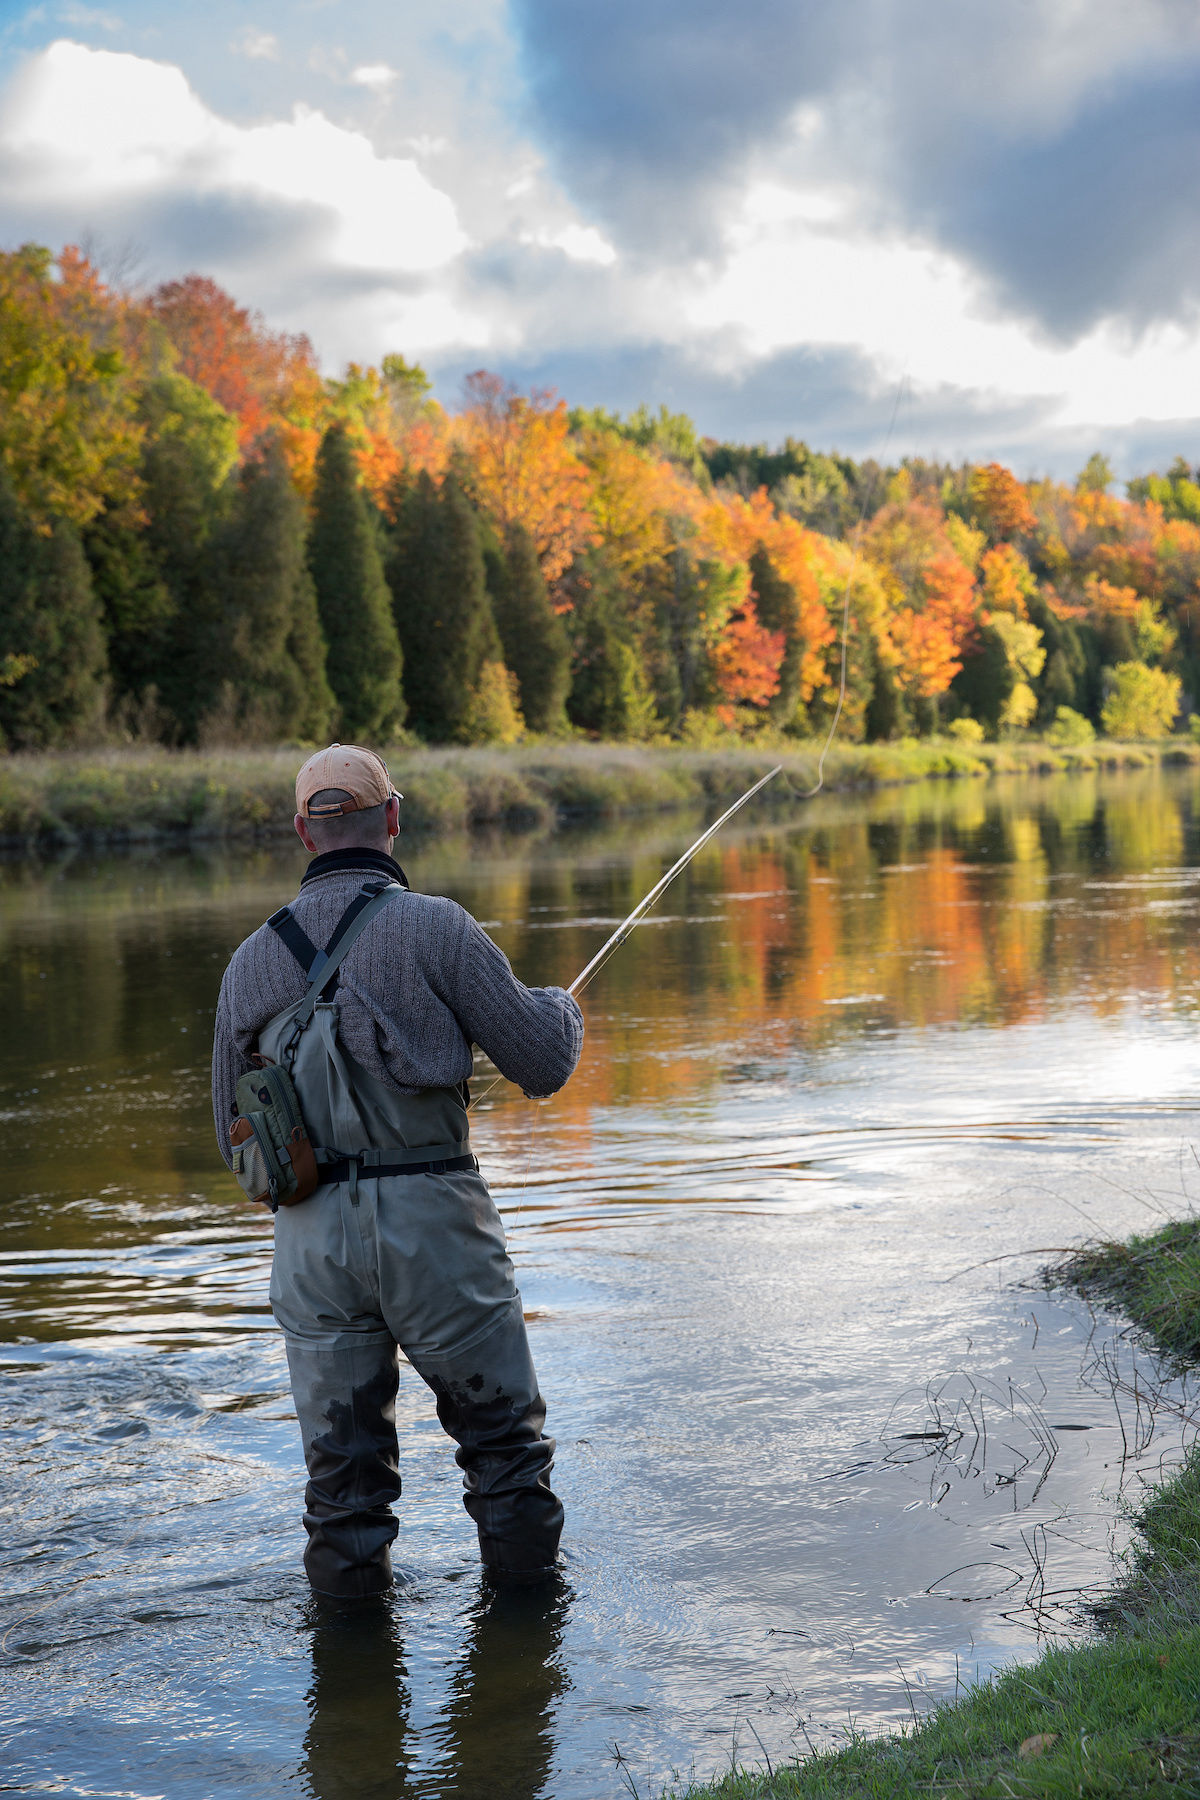 Man fly fishing in the fall in a river